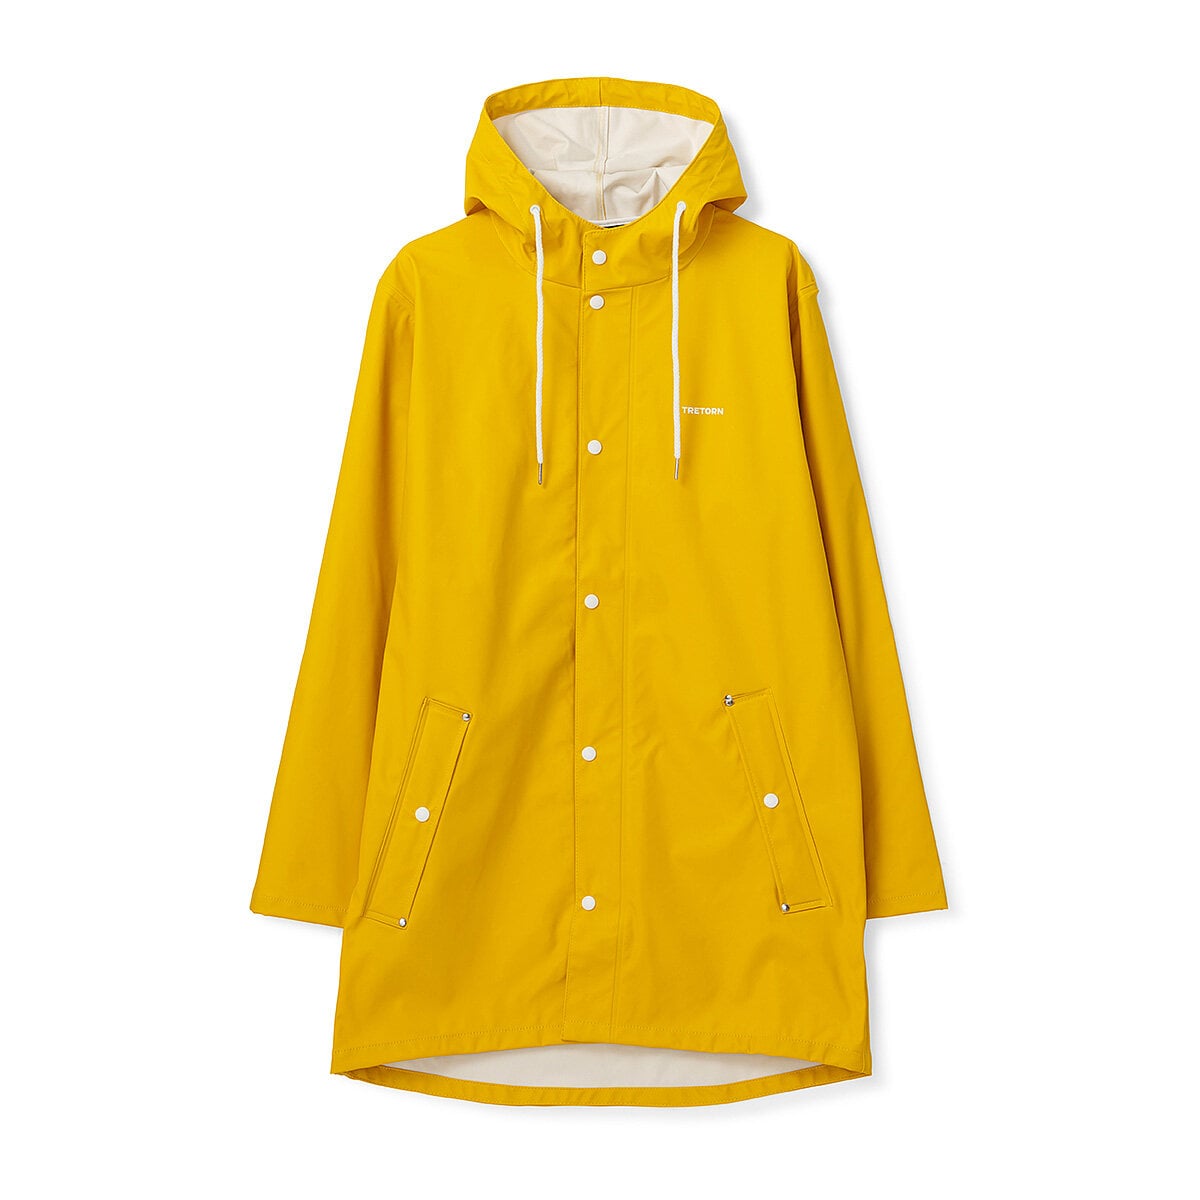 Wings rain jacket by Tretorn for men and women in the colour yellow